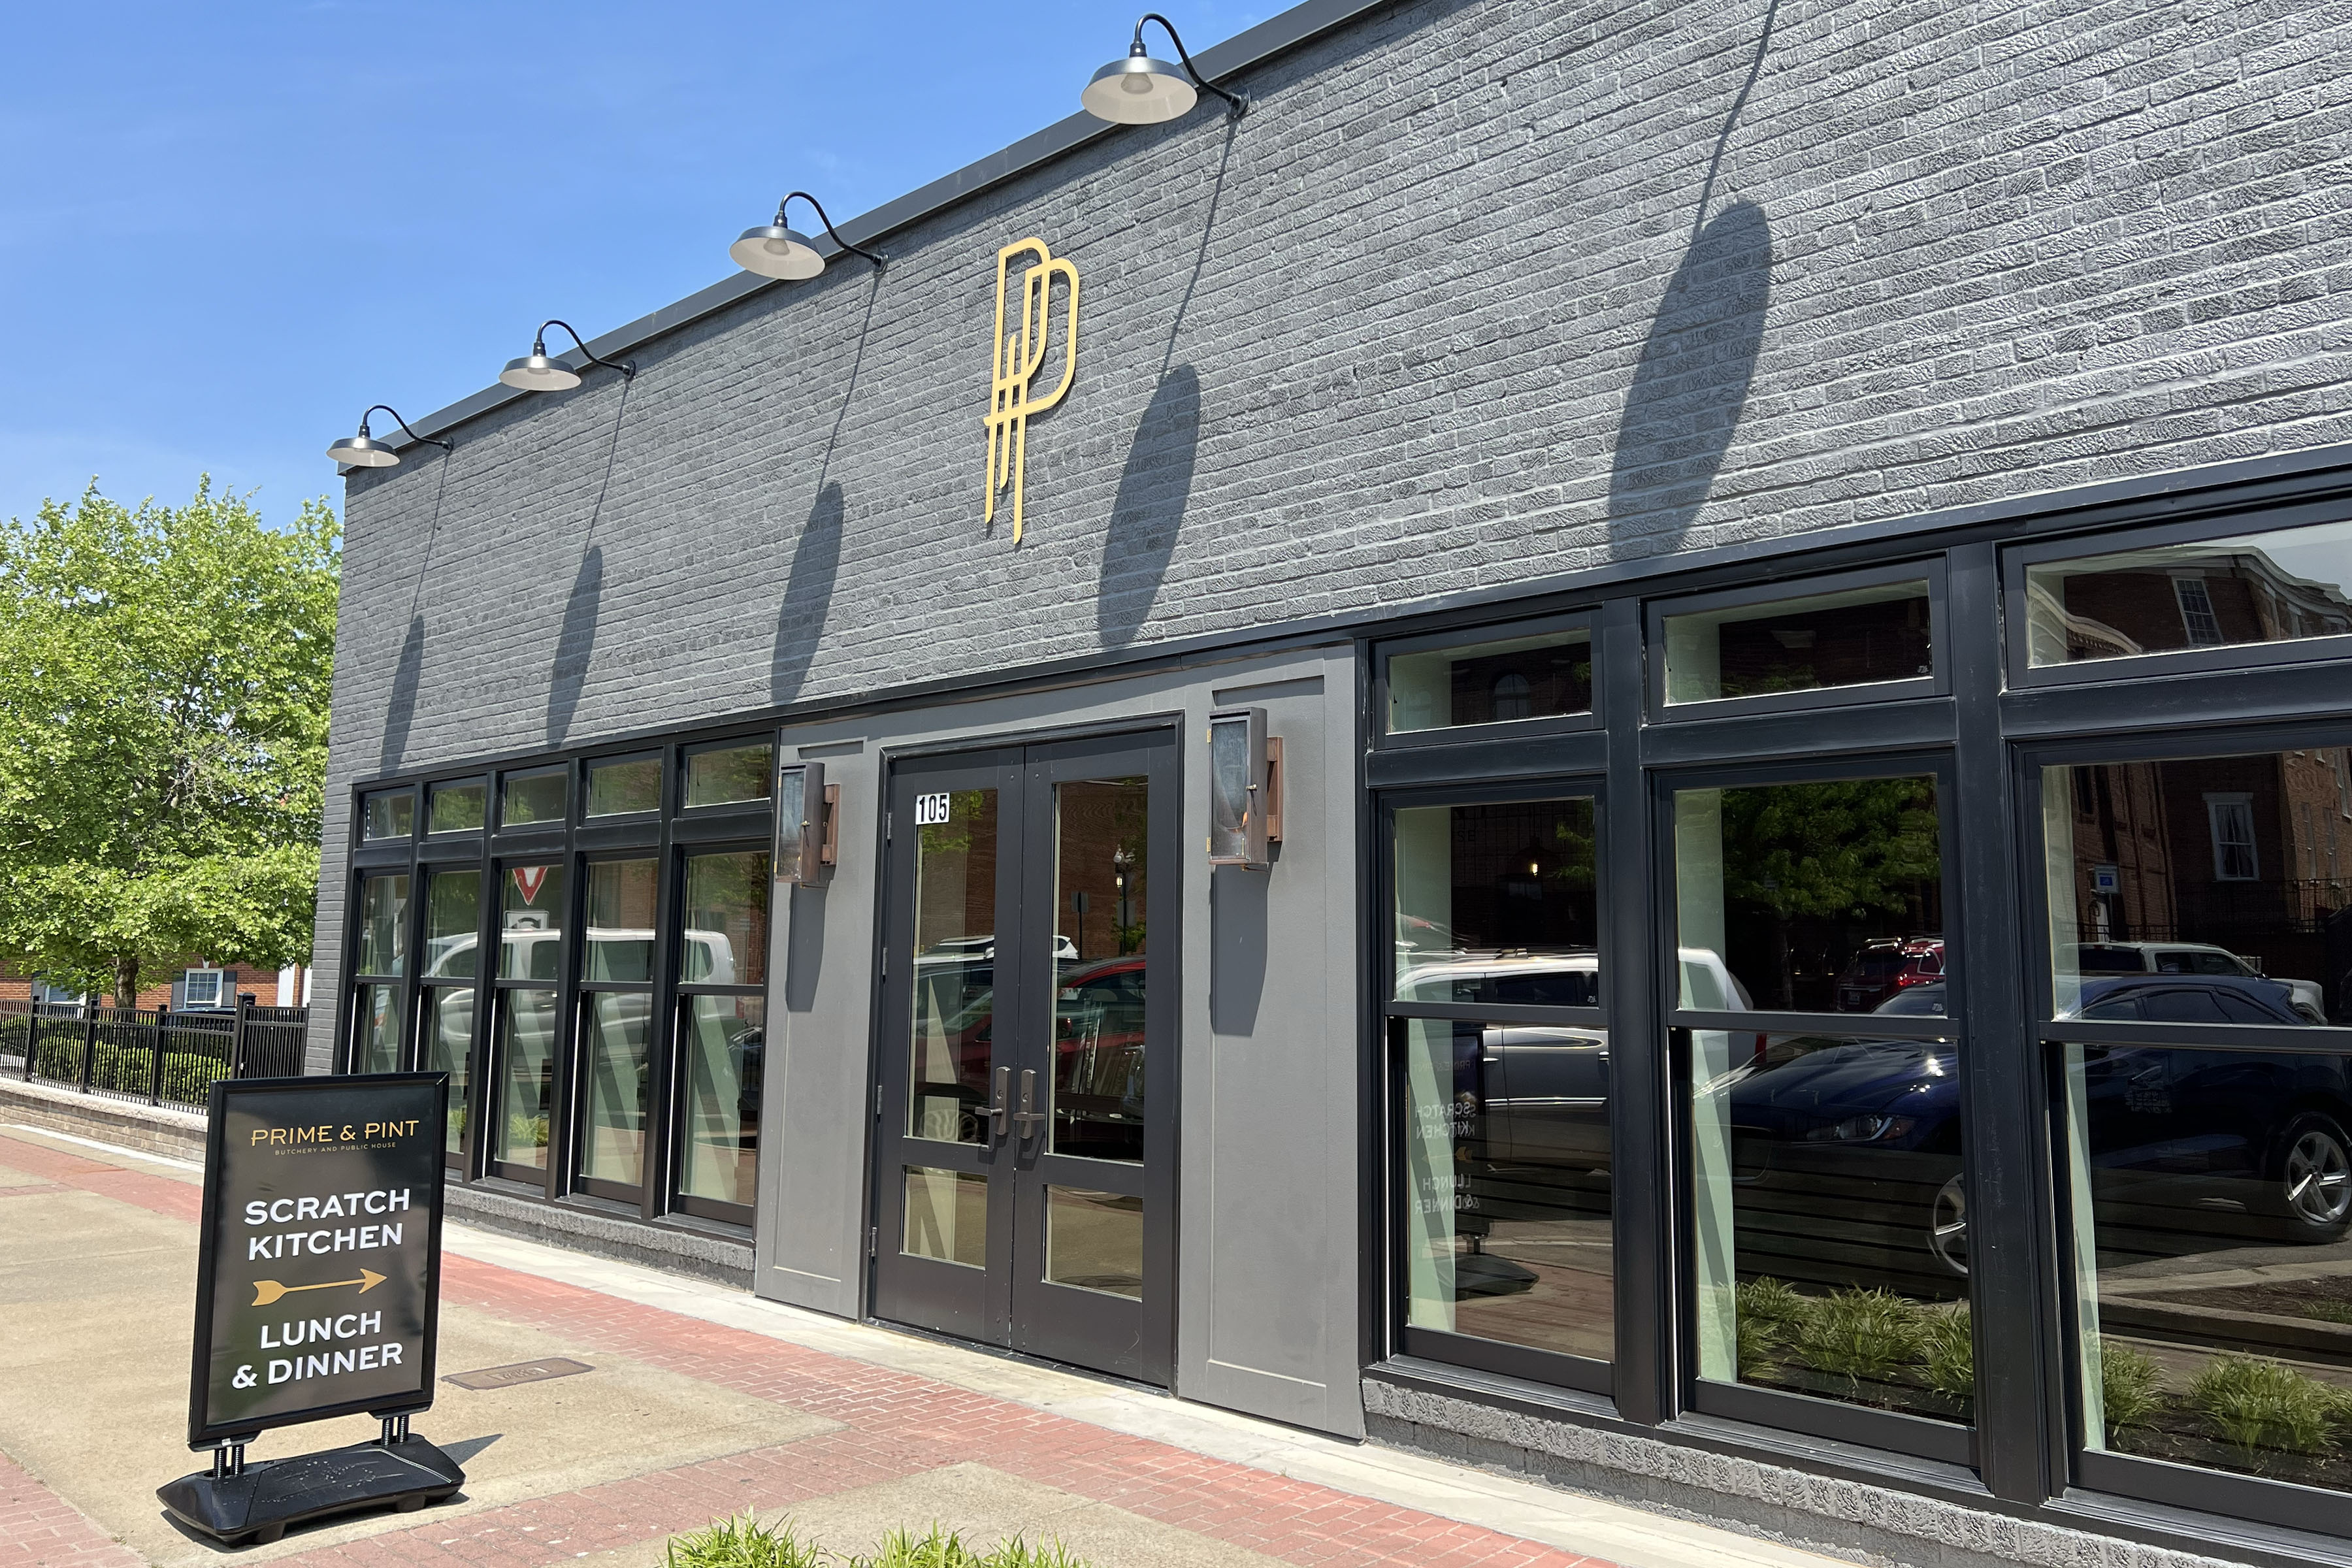 Mike's efforts have brought new businesses, including restaurant Prime & Pint